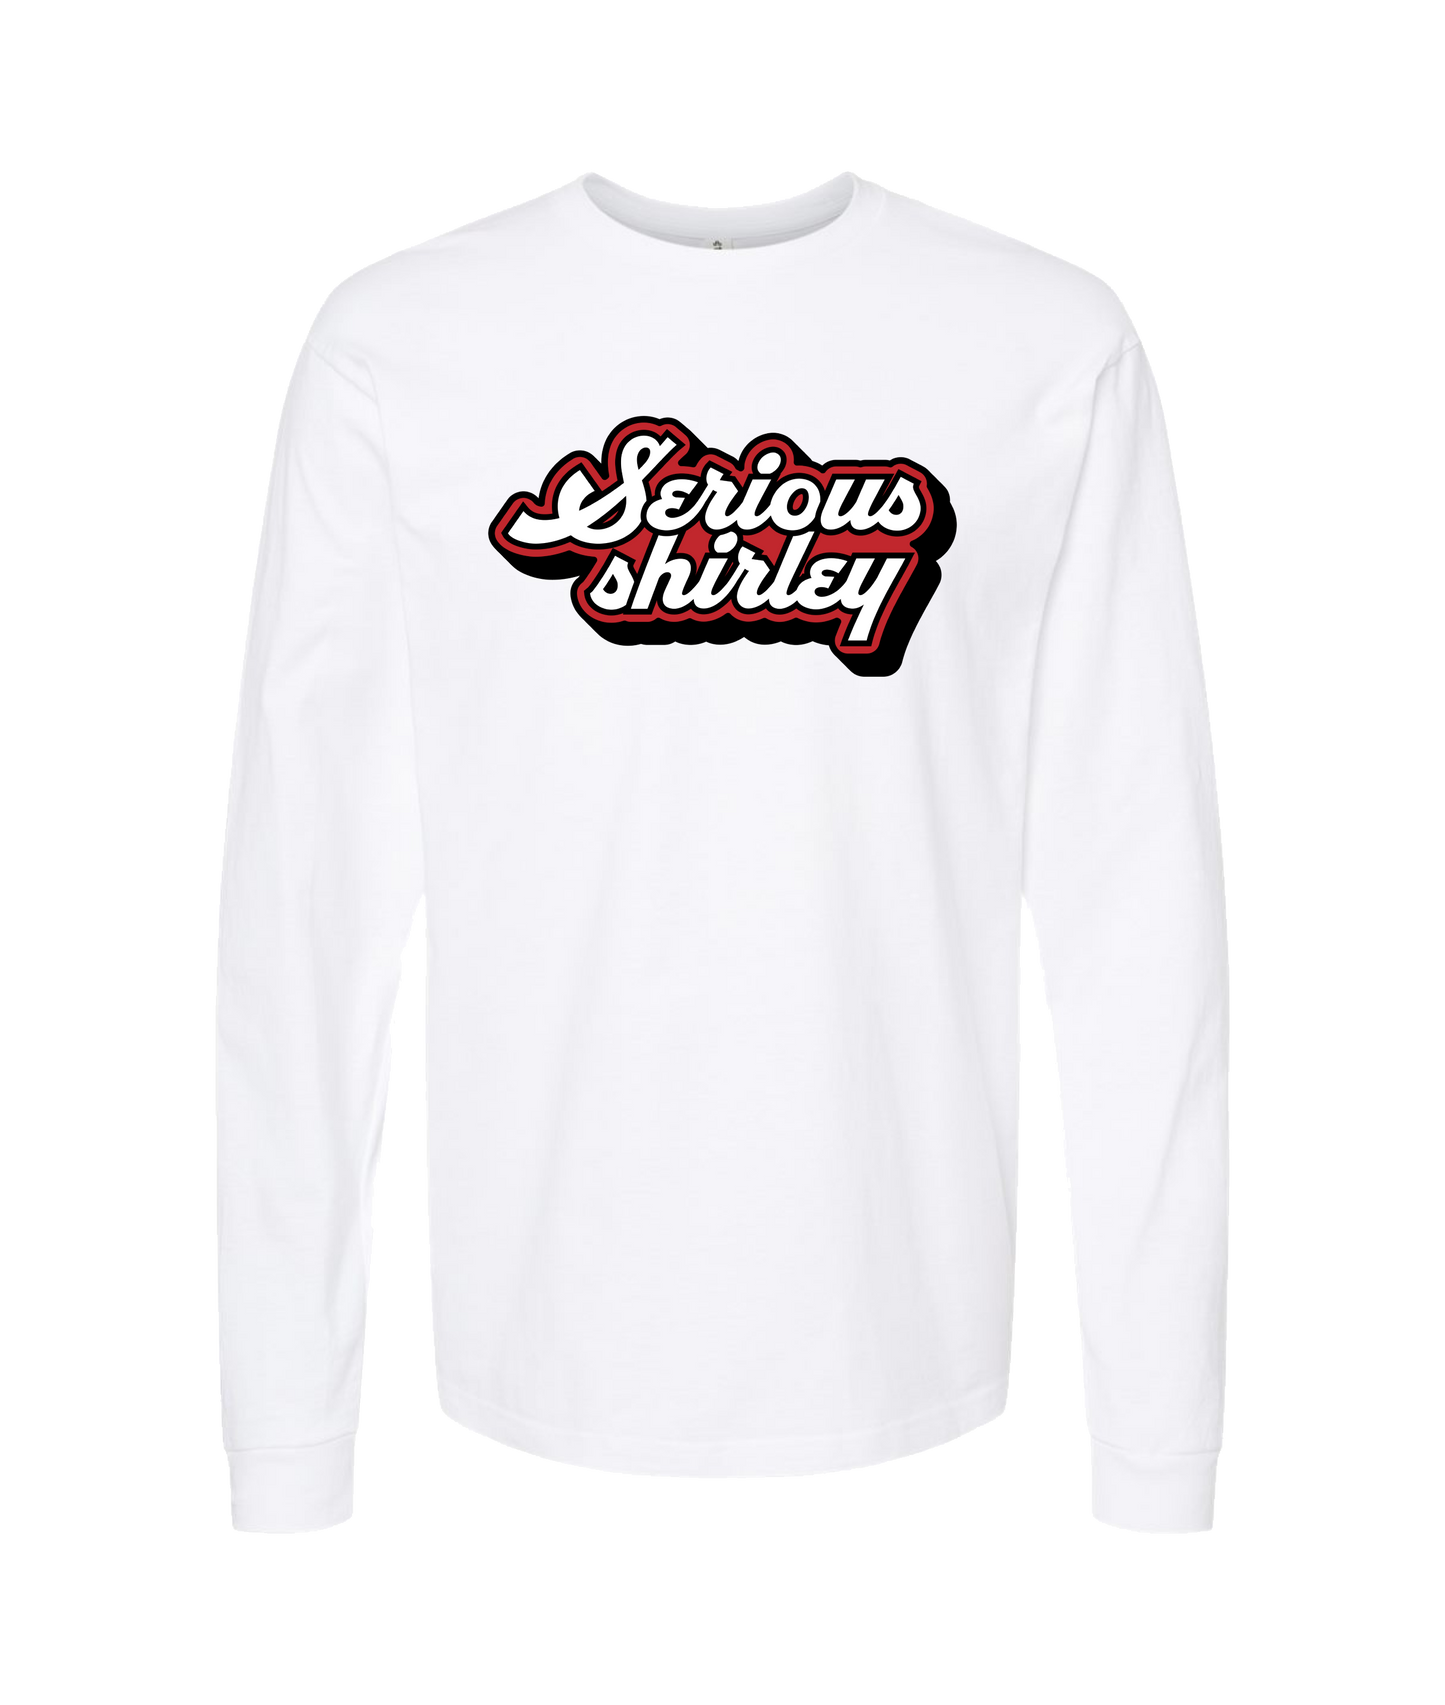 Serious Shirley - Red and White Logo - White Long Sleeve T